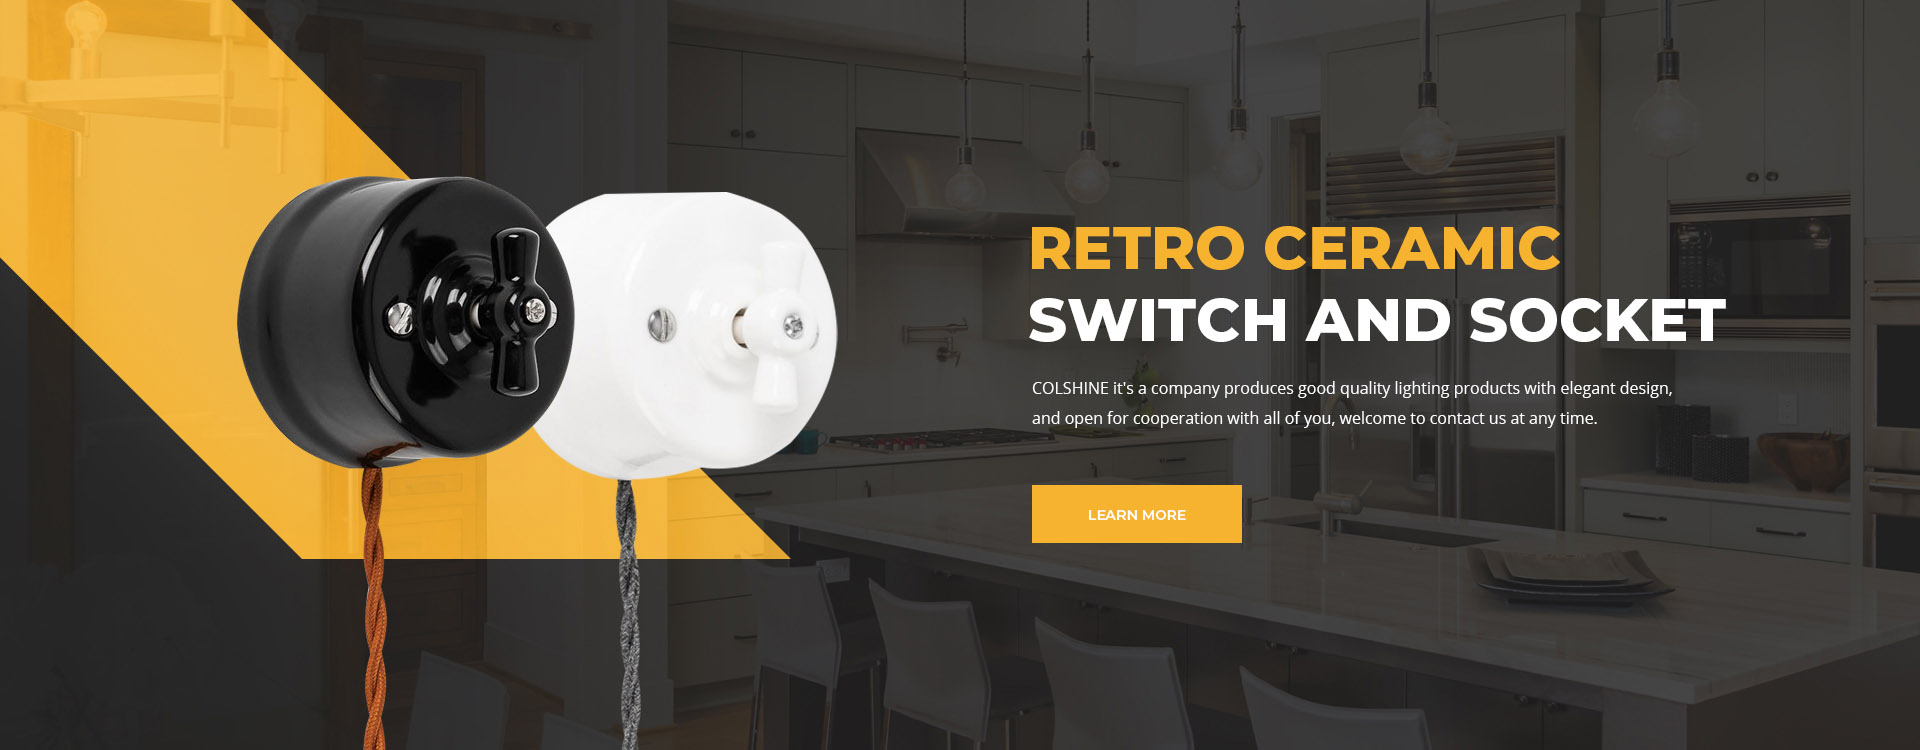 Retro Ceramic Switches and Sockets